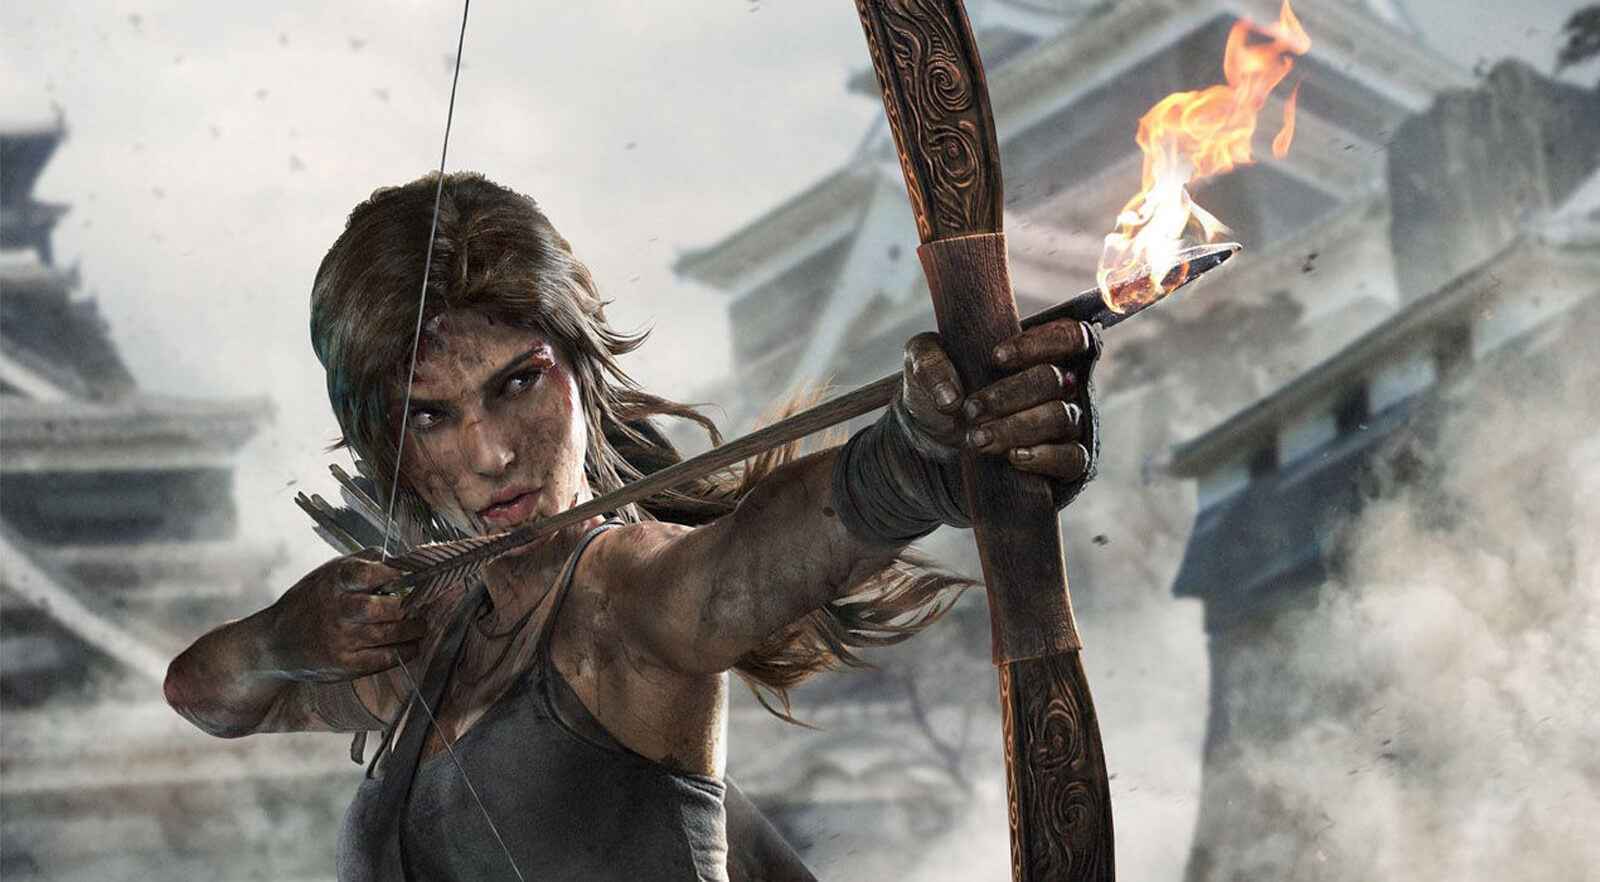 Grab Tomb Raider, Deiland, and More Games for Free on Steam